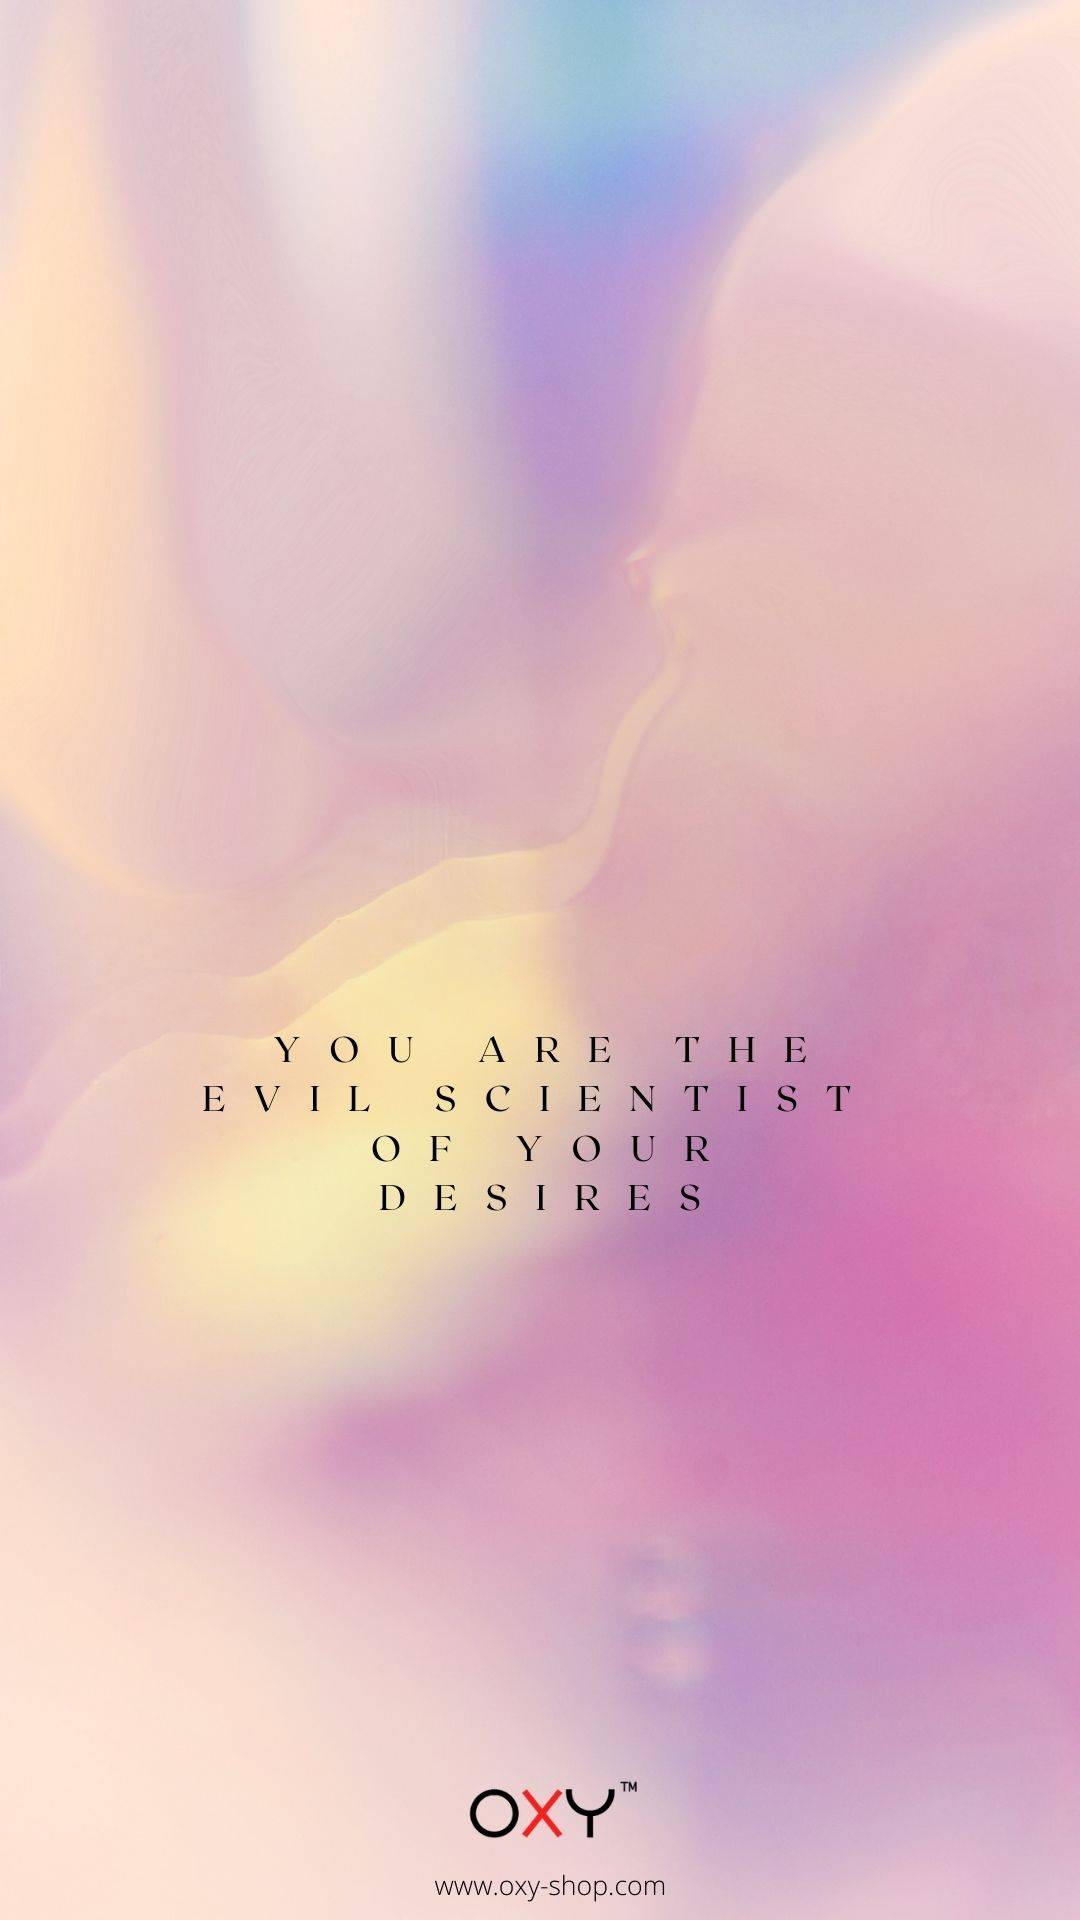 You are the evil scientist of your desires. - BDSM wallpaper